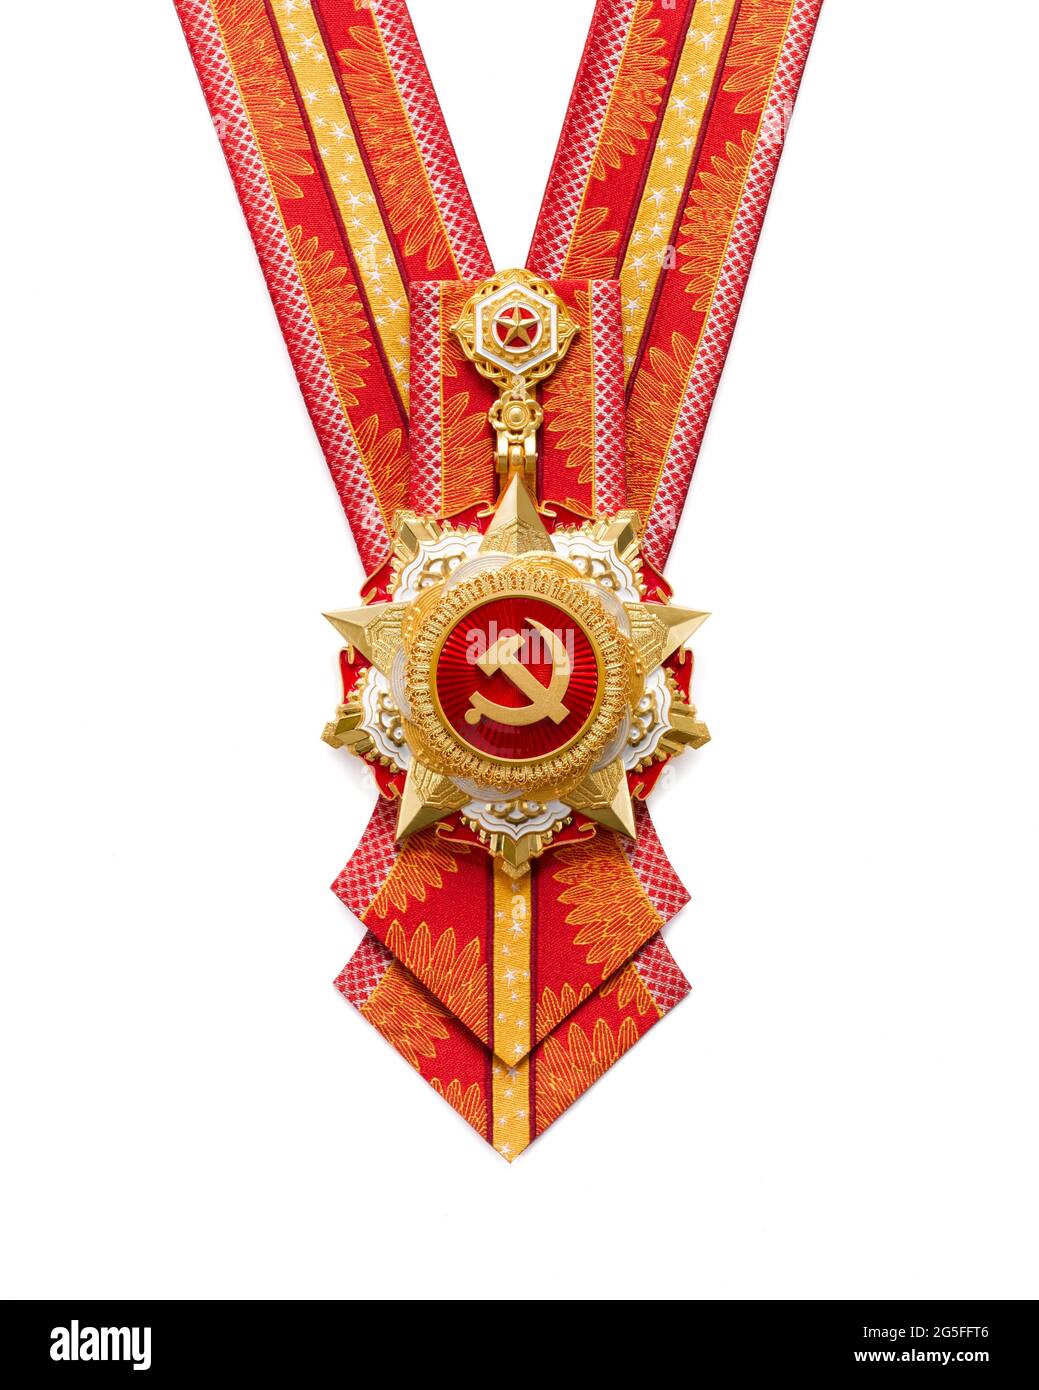 Beijing, China. 27th June, 2021. This is the July 1 Medal. A ceremony to present the July 1 Medal to outstanding Communist Party of China (CPC) members will be held at the Great Hall of the People in Beijing on June 29, 2021. Credit: Xinhua/Alamy Live News Stock Photo